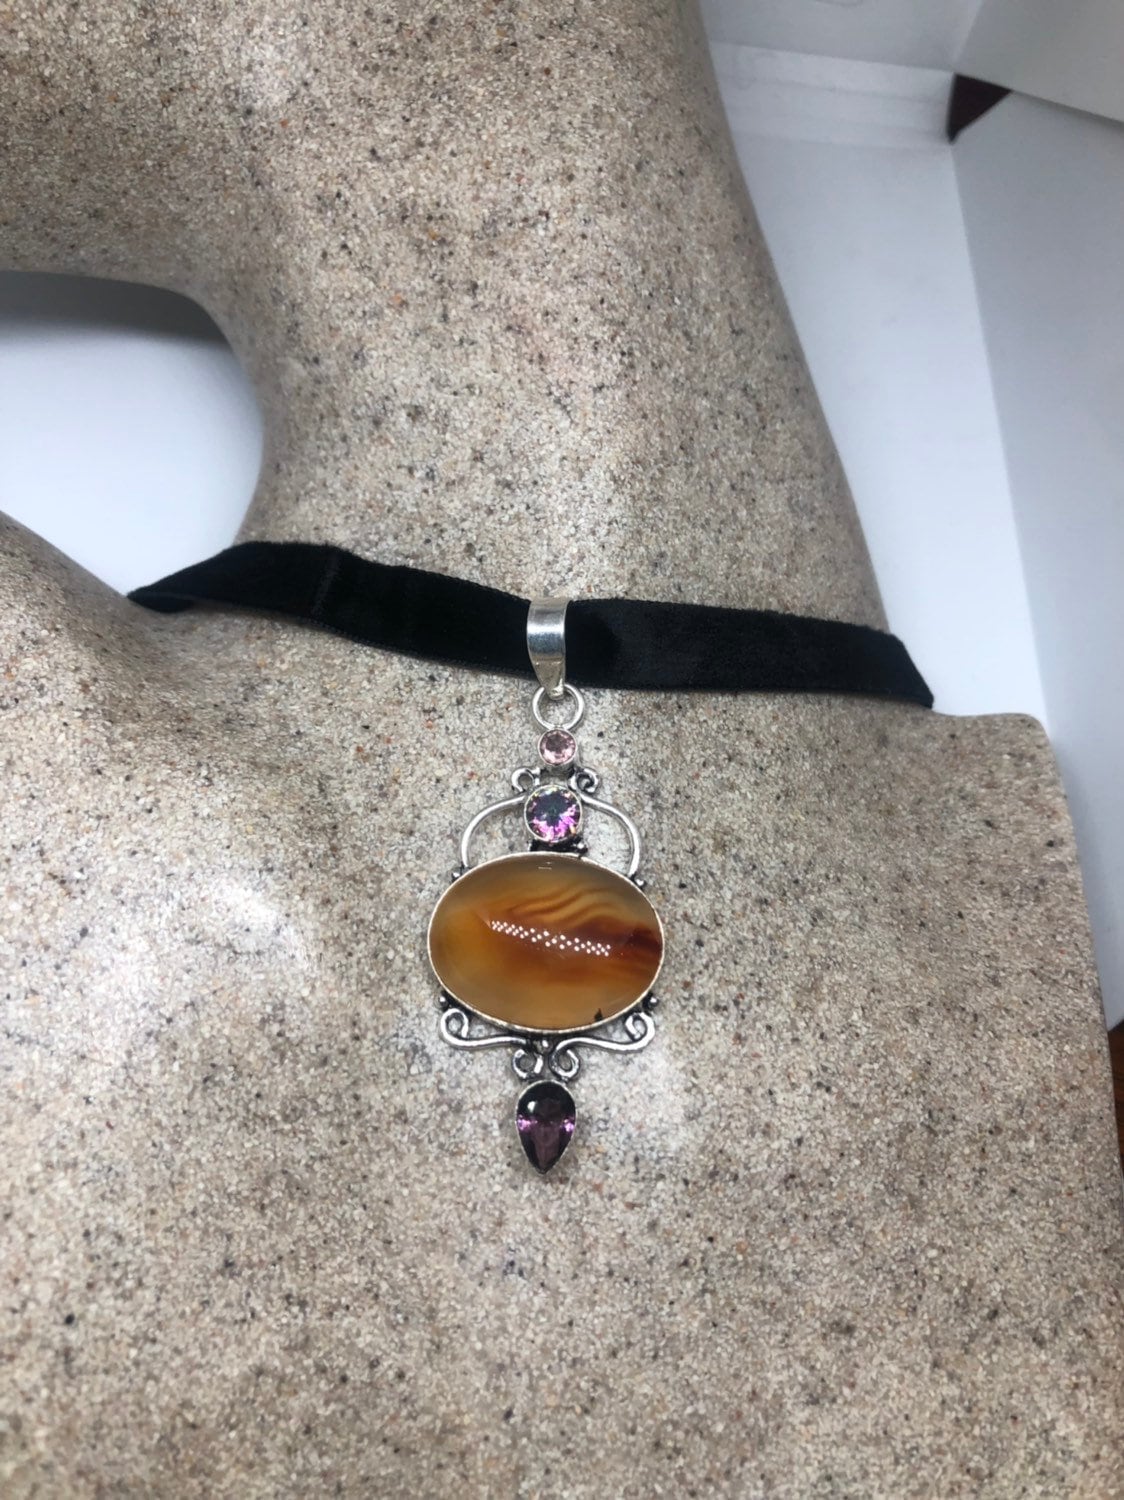 Vintage Handmade Gothic Styled Silver Finished Genuine Carnelian Agate and Choker Necklace